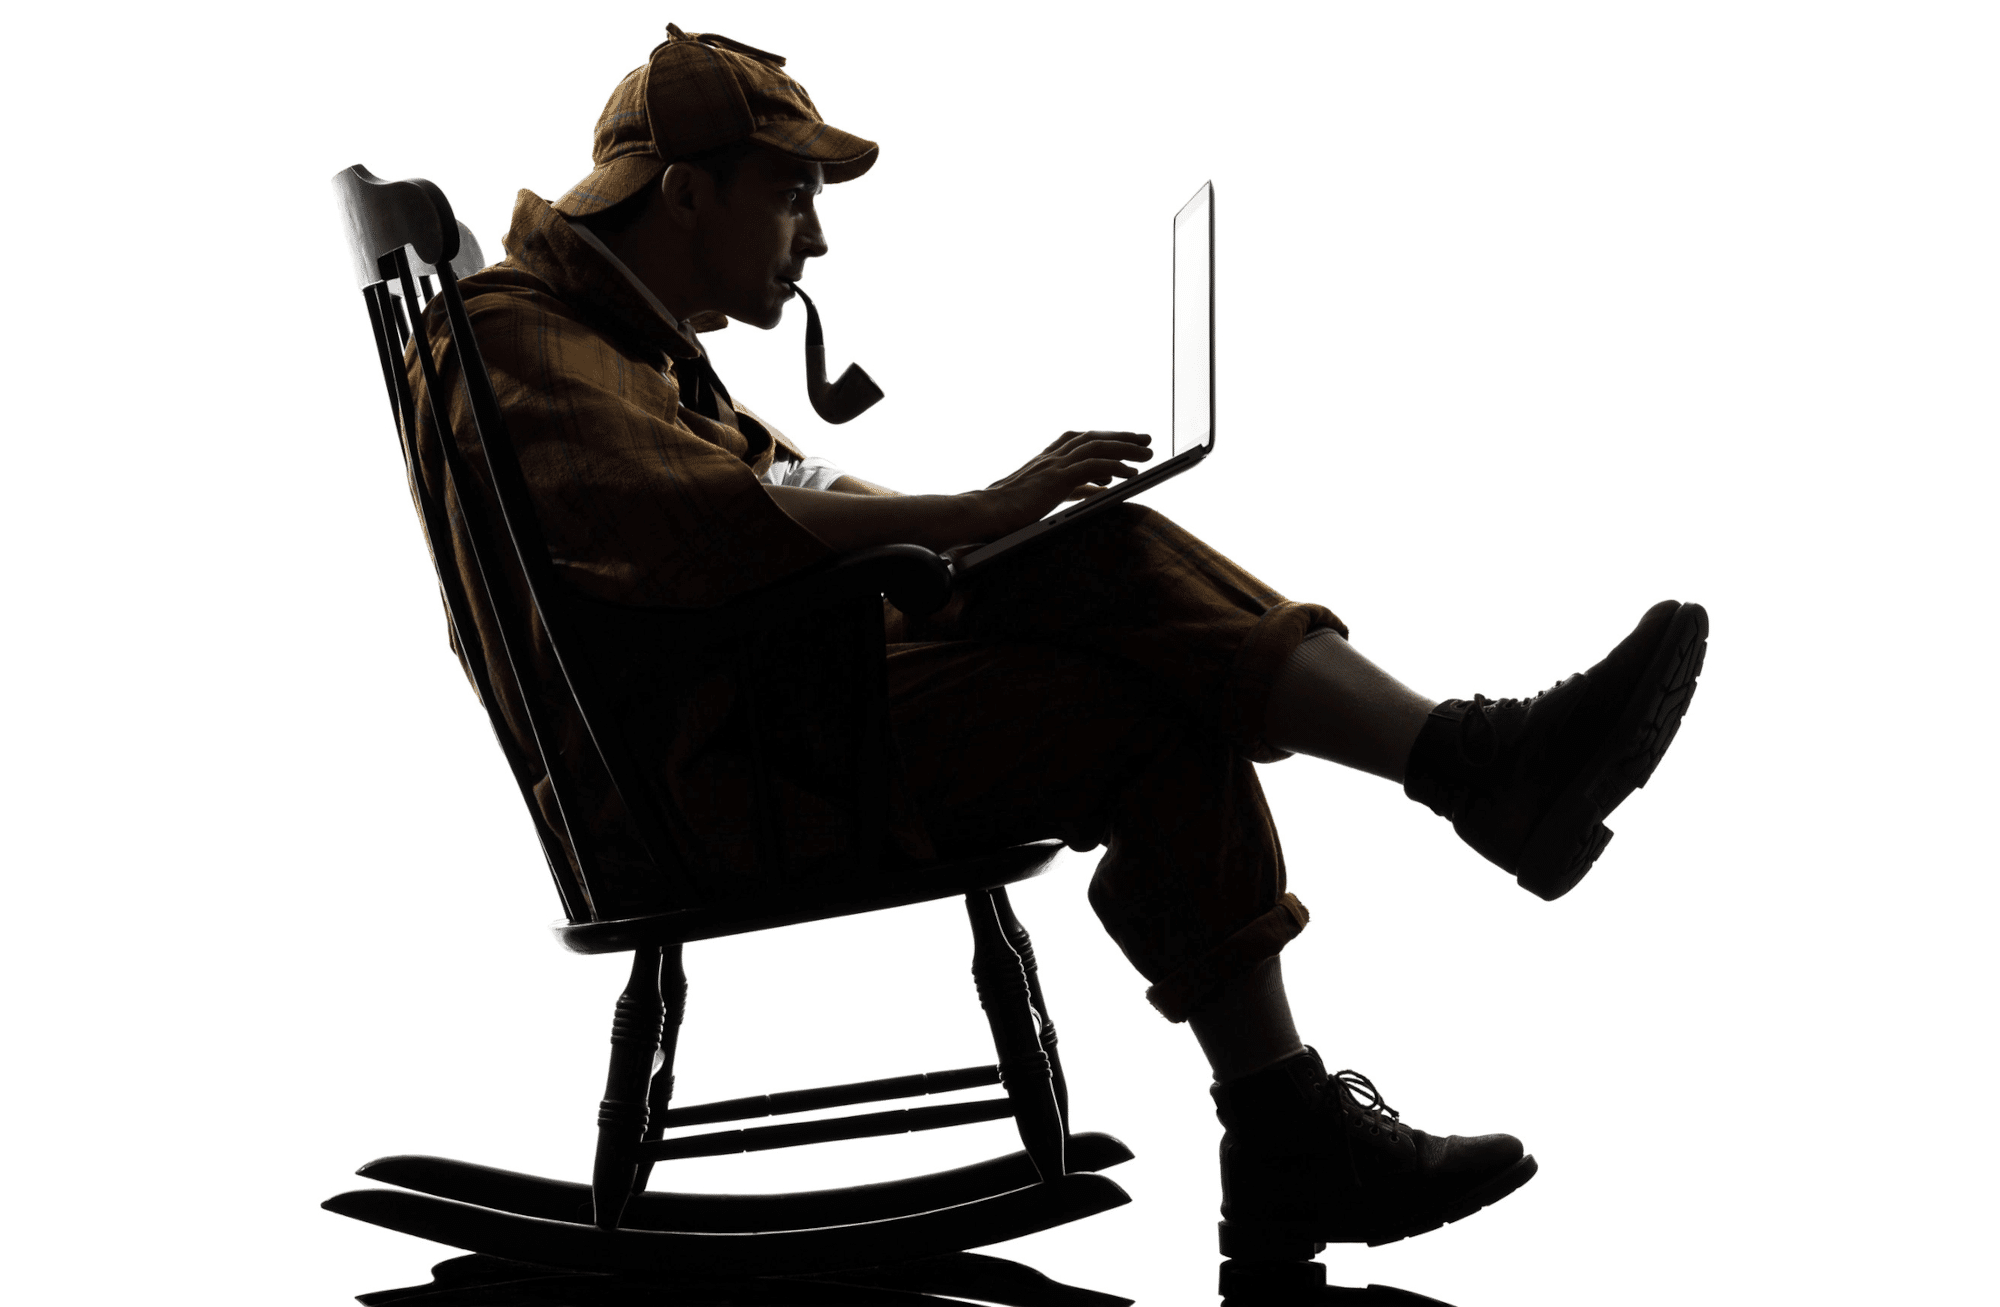 Sherlock Holmes as a modern-day consultant sitting in his chair with laptop creating an online survey.